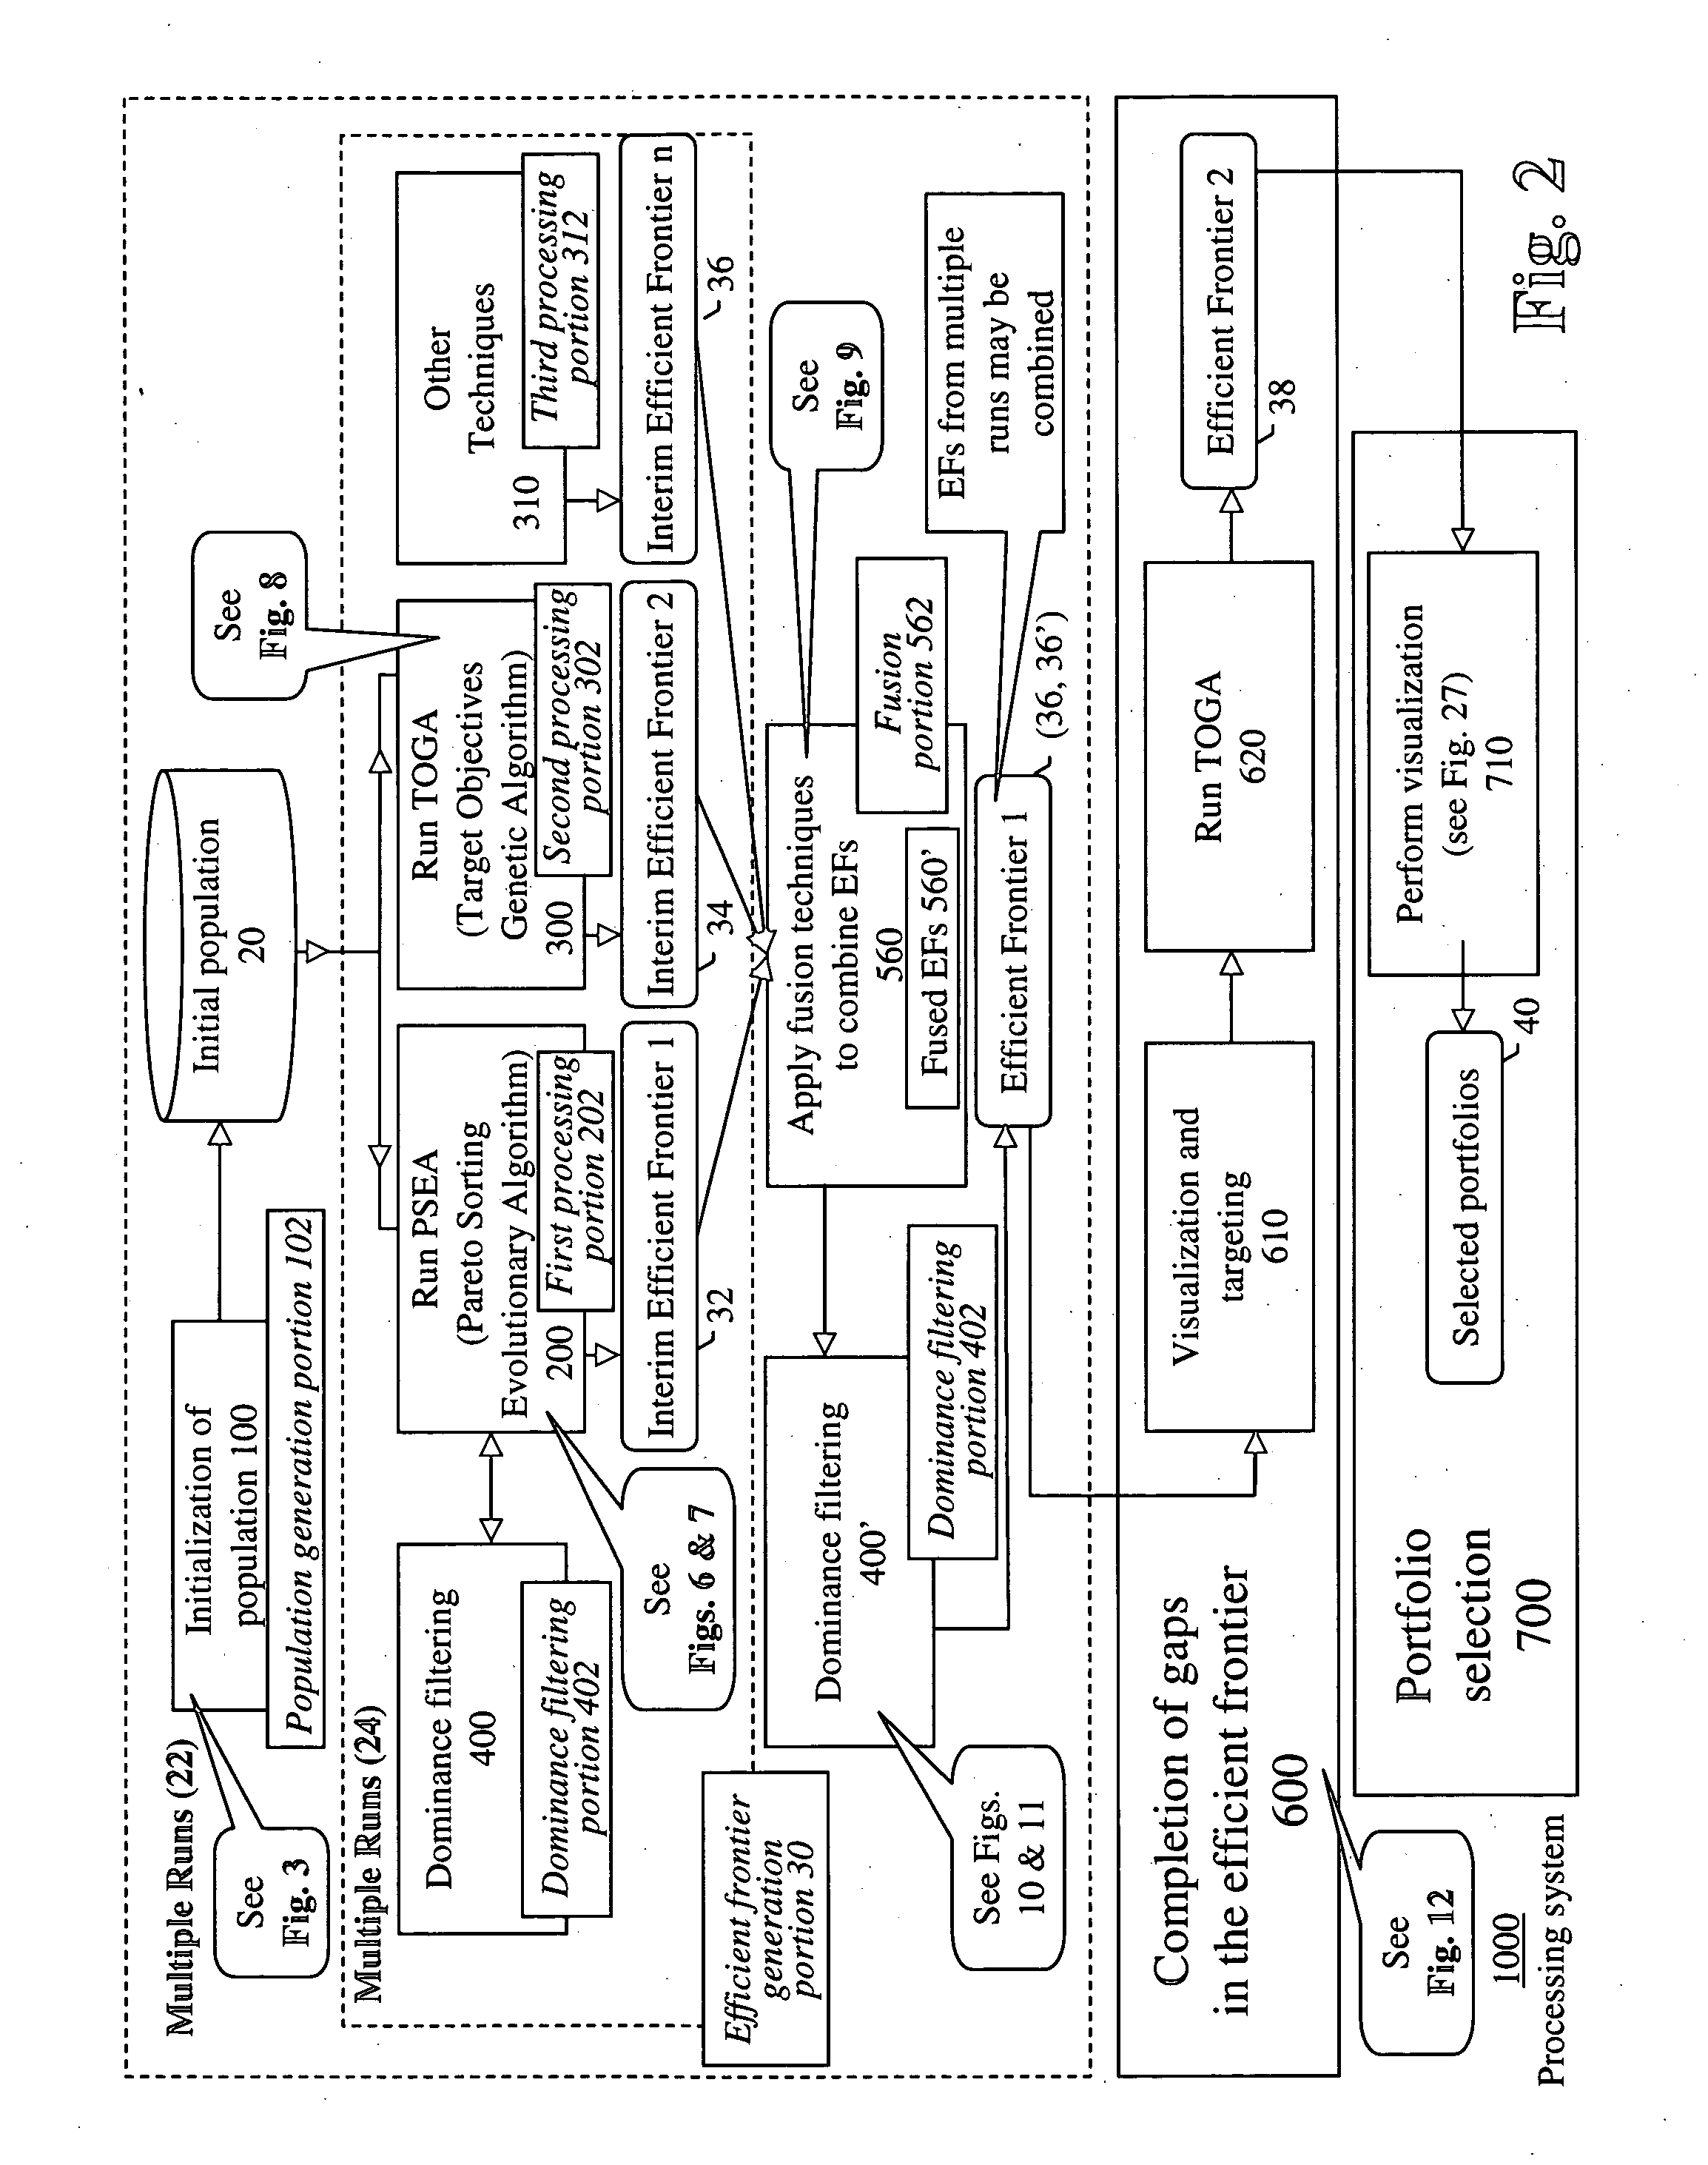 Systems and methods for multi-objective portfolio optimization